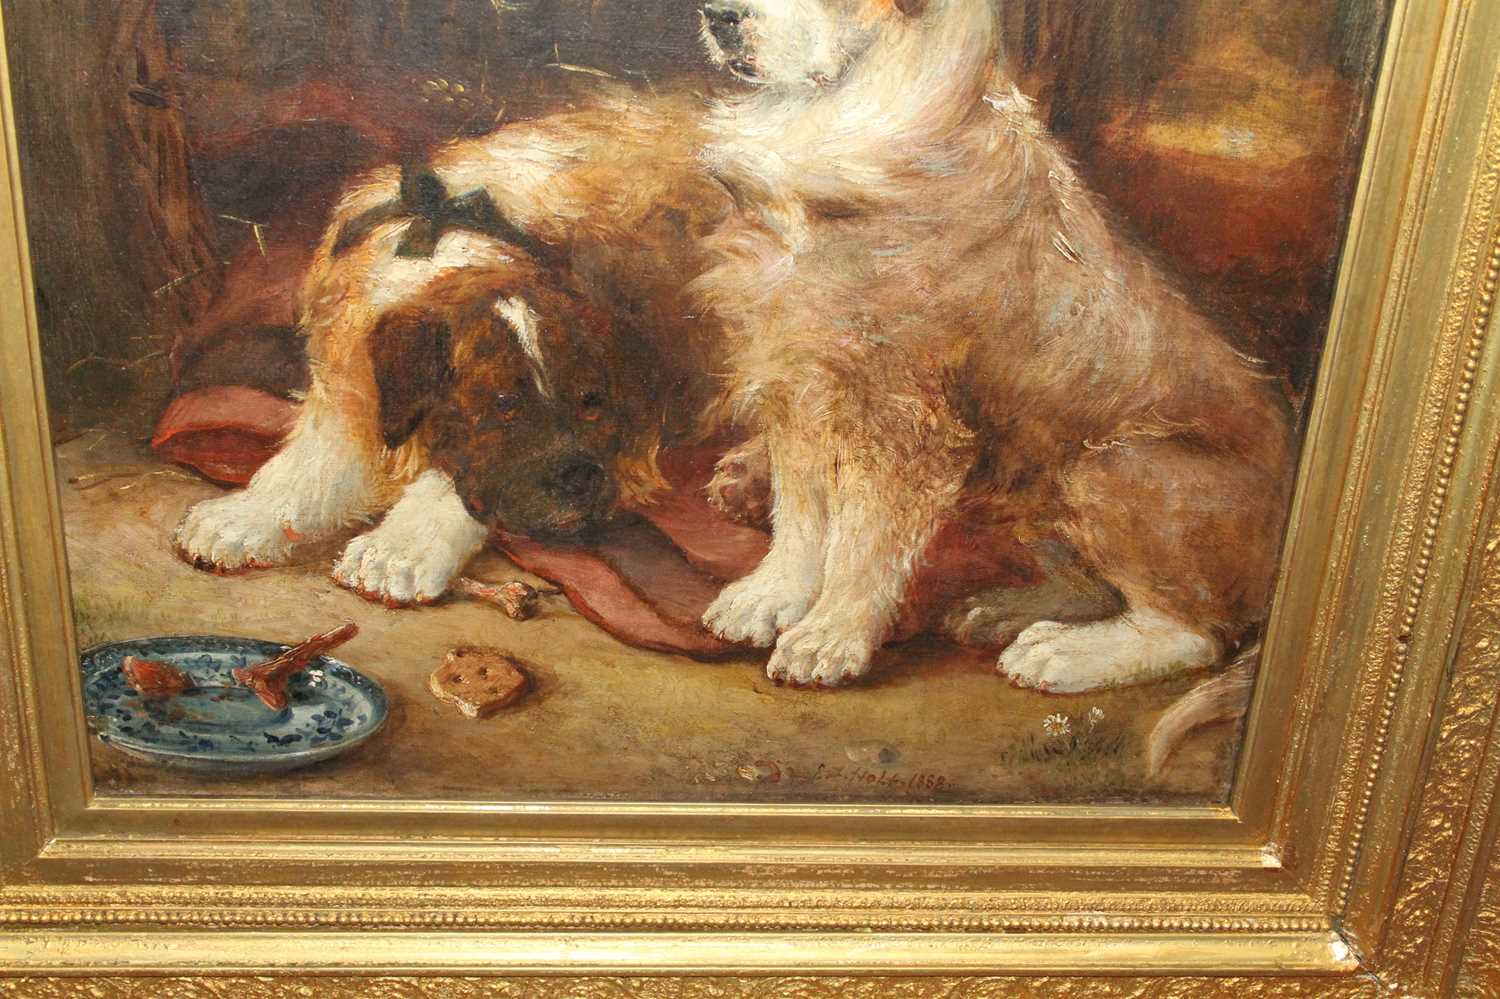 Edwin Frederick Holt (1830-1912) - St Bernards at Feeding Time, oil on canvas, signed and dated - Image 3 of 6